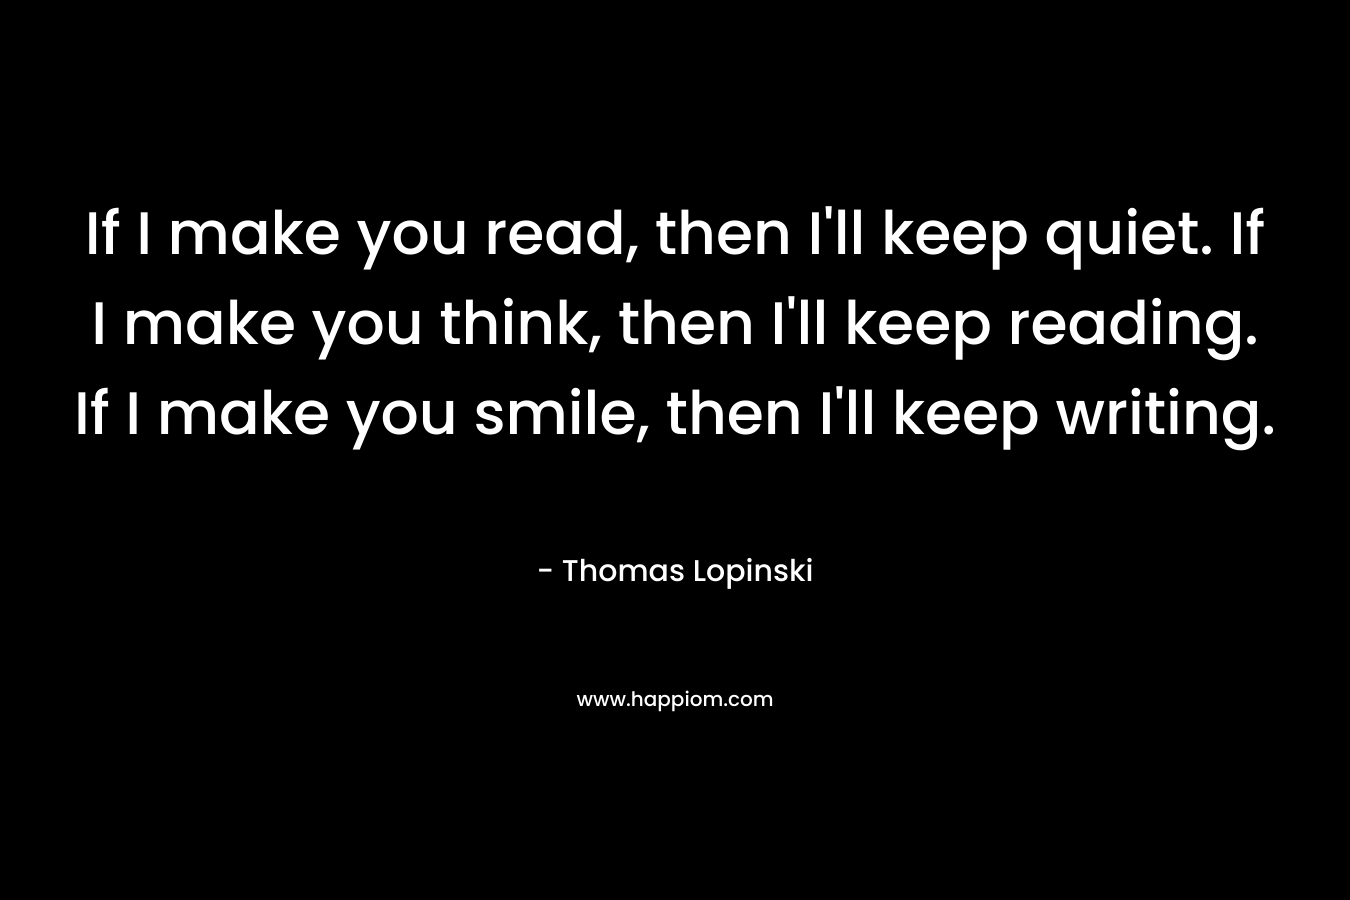 If I make you read, then I'll keep quiet. If I make you think, then I'll keep reading. If I make you smile, then I'll keep writing.